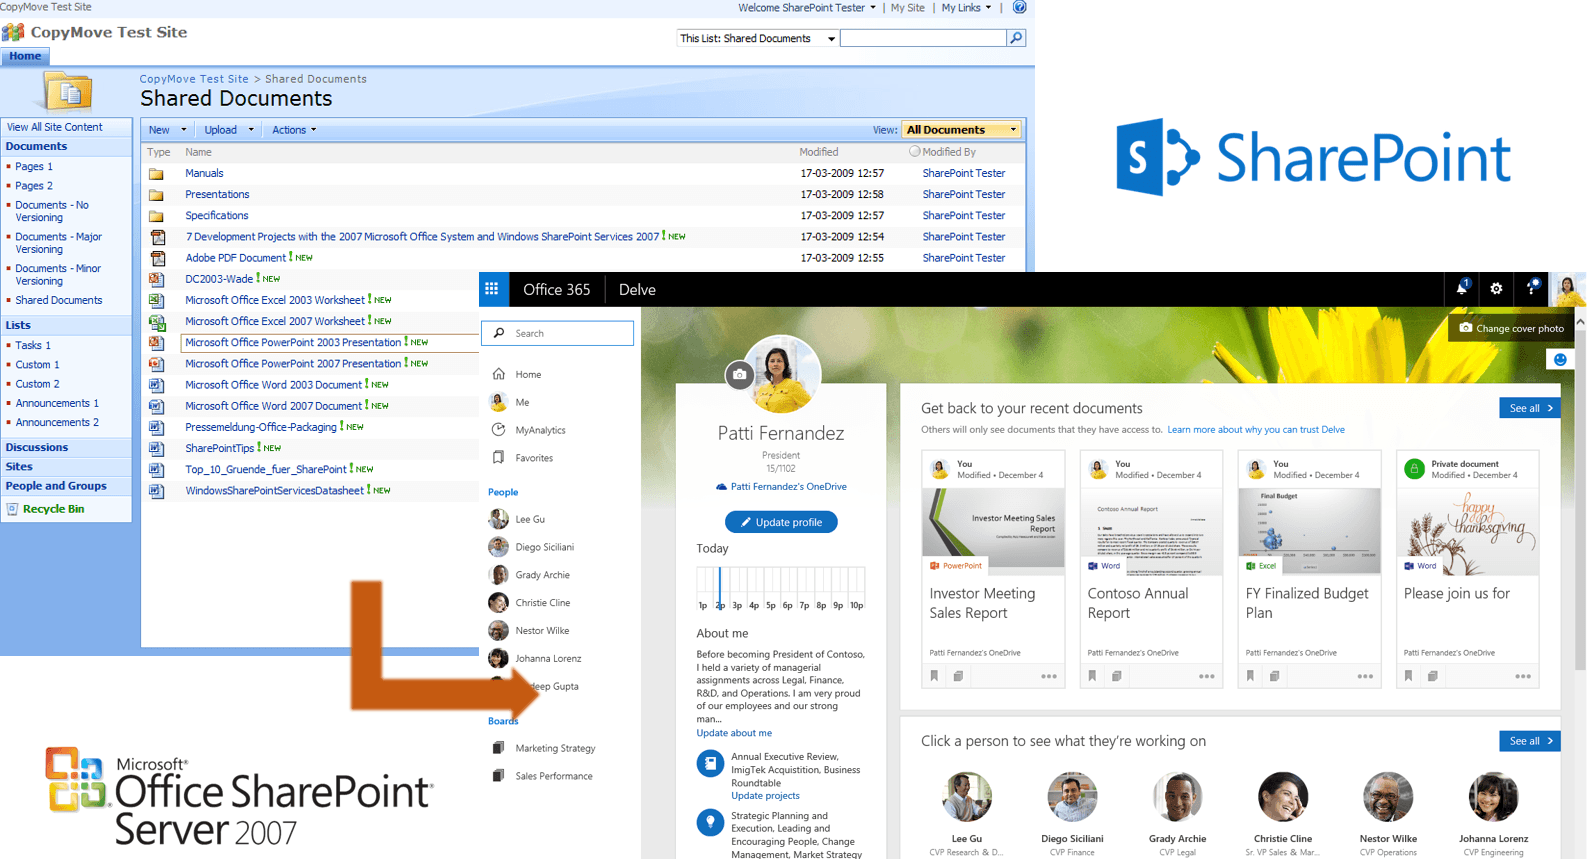 SharePoint 2007 UI changes 